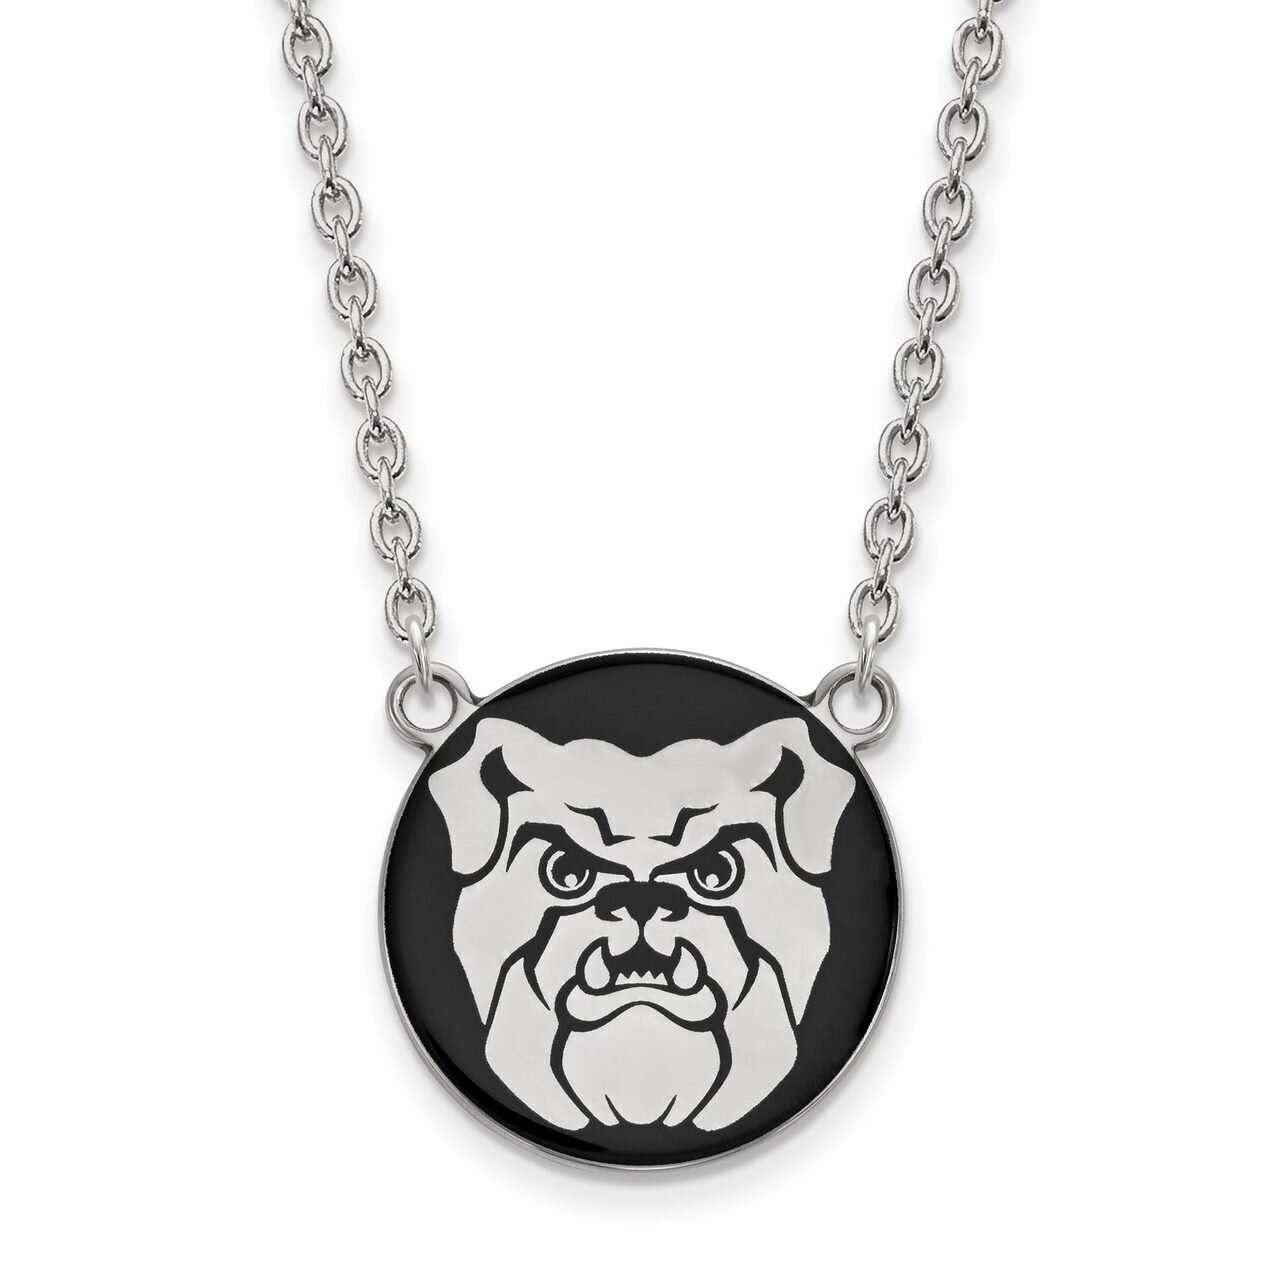 Butler University Enamel Large Pendant with Chain Necklace Sterling Silver SS010BUT-18